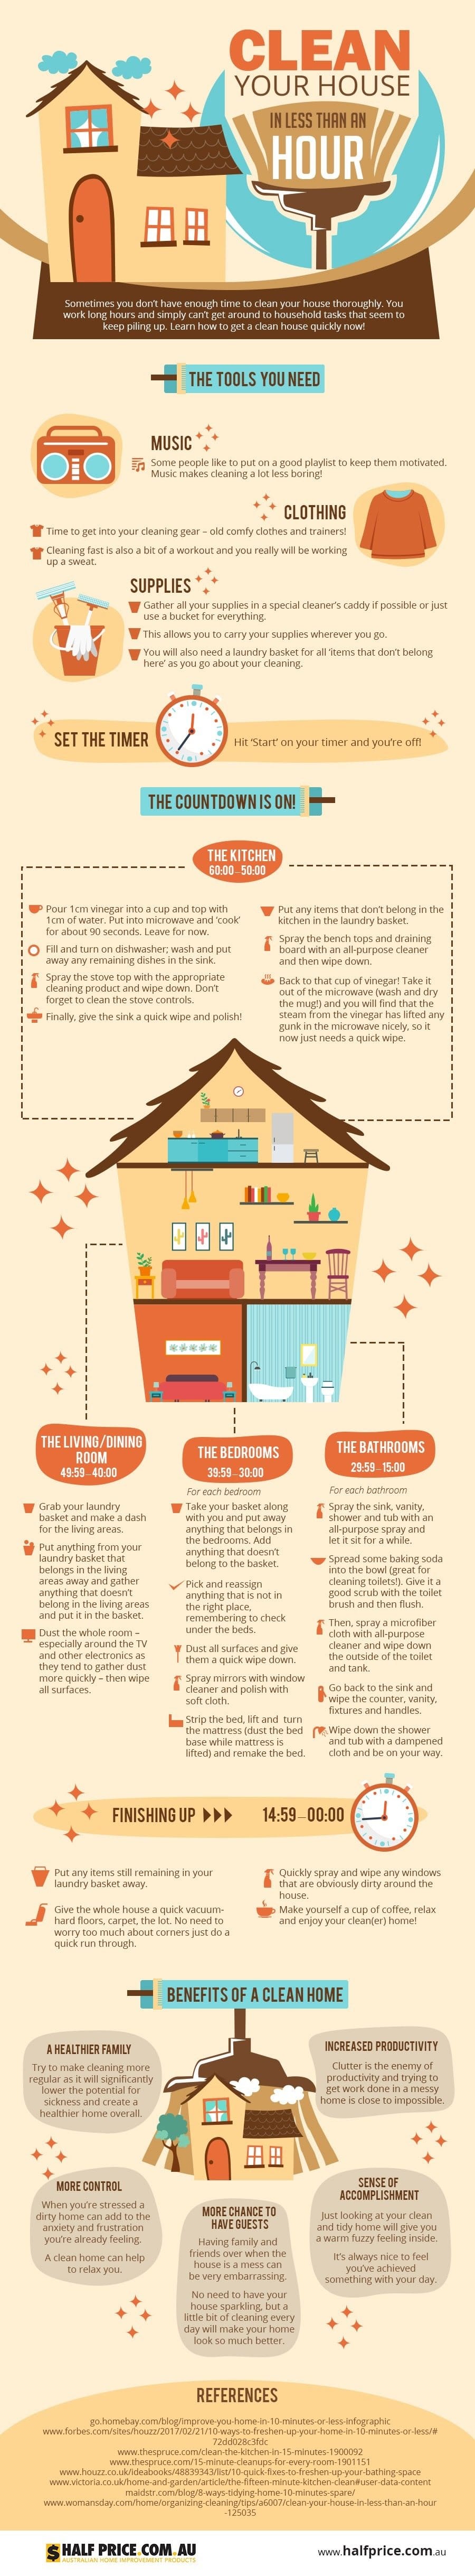 Cleaning Your Home in Less Than an Hour Infographic